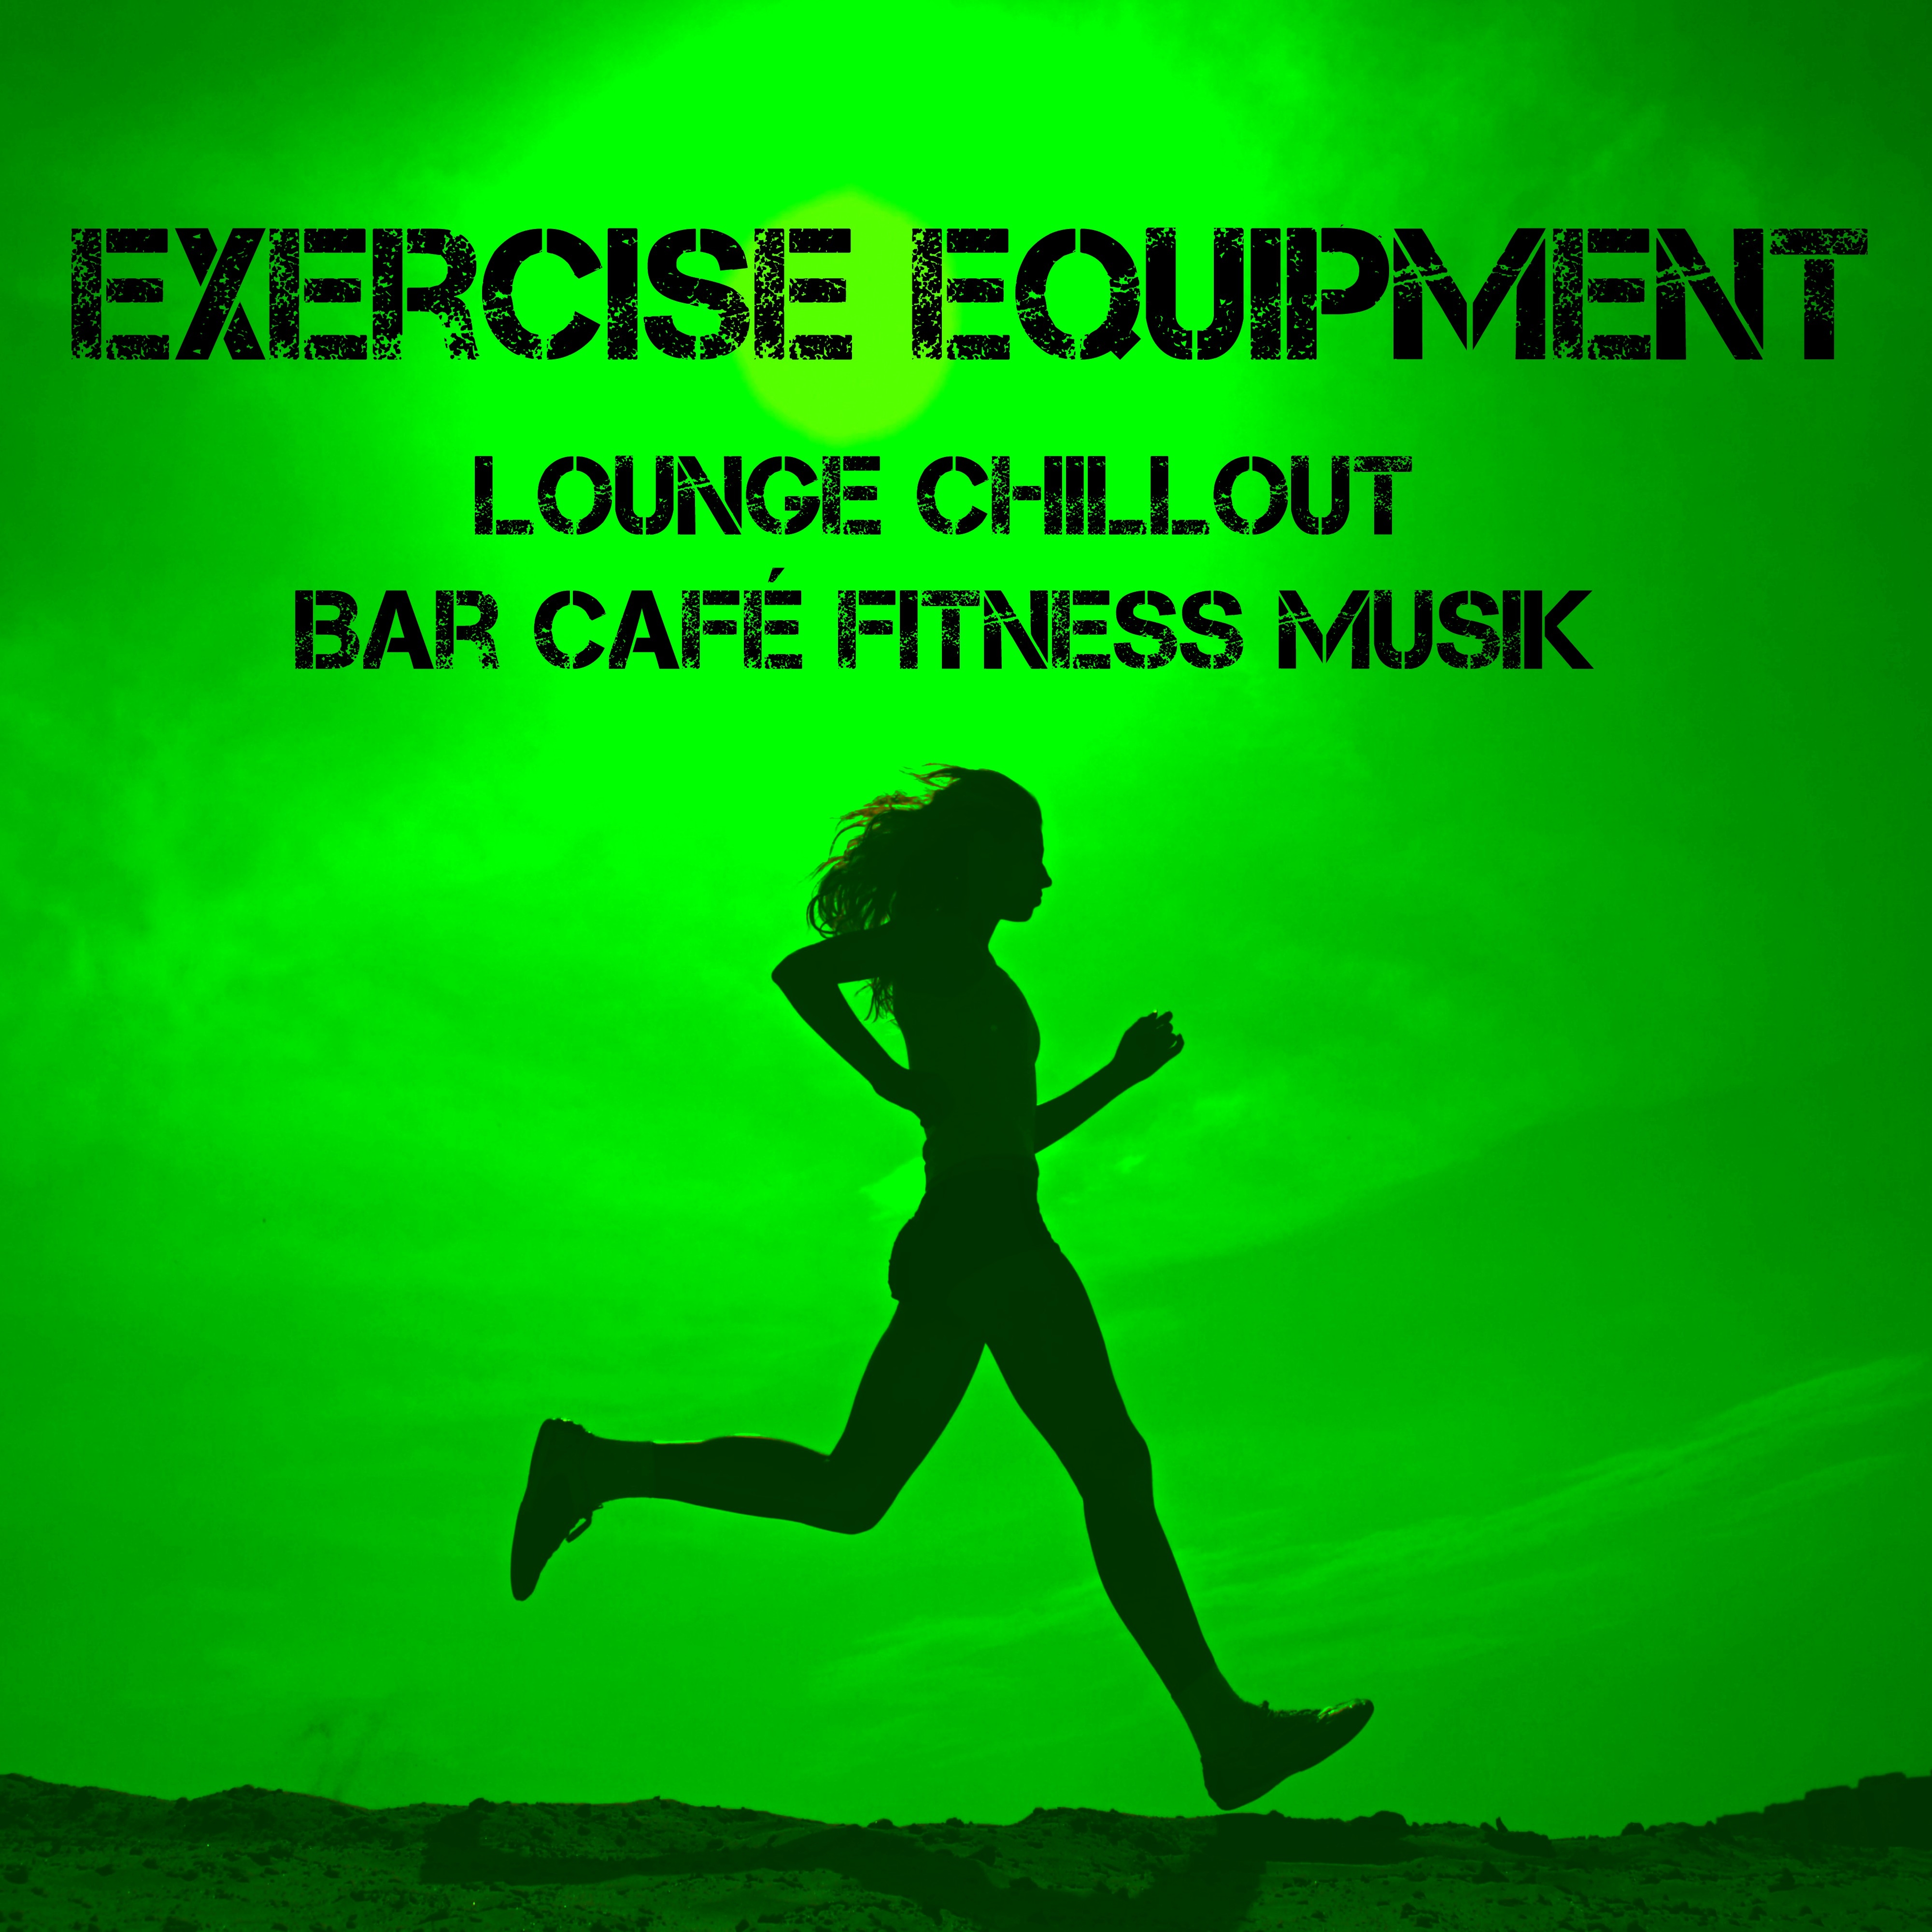 Exercise Equipment  Lounge Chillout Bar Cafe Fitness Musik f r Funktionell Tr nings vningar